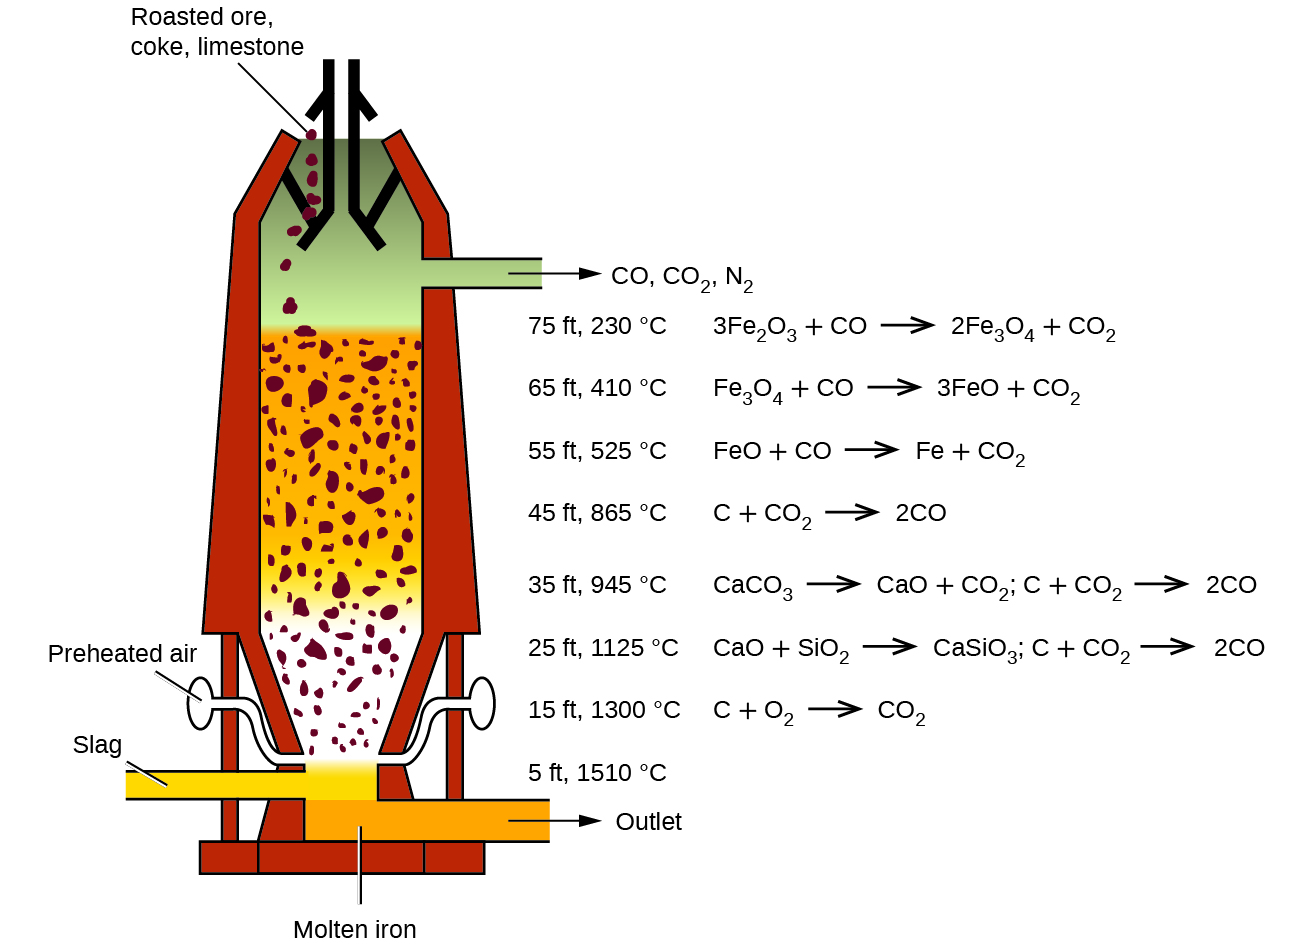 At the right side of the figure, furnace heights are labeled in order of increasing height between the outlet pipes, followed by temperatures and associated chemical reactions. Just above the pipe labeled, “Outlet,” no chemical equation at 5 f t, 1510 degrees C. At 15 f t, 1300 degrees C is the eC plus O subscript 2 right pointing arrow C O subscript 2. At 25 f t, 1125 degrees C are the two reactions, C a O plus S i O subscript 2 right pointing arrow C a S i O subscript 3 and C plus C O subscript 2 right pointing arrow 2 C O. At 35 f t, 945 degrees C, are the two reactions C a C O subscript 3 right pointing arrow C a O plus C O subscript 2, and C plus C O subscript 2 right pointing arrow 2 C O. At 45 f t, 865 degrees C is C plus C O subscript 2 right pointing arrow 2 C O. At 55 f t, 525 degrees C is the equation F e O plus C O right pointing arrow F e plus C O subscript 2. At 65 f t, 410 degrees C, is F e subscript 3 O subscript 4 plus C O right pointing arrow 3 F e O plus C O subscript 2. At 75 f t, 230 degrees C, is the equation, 3 F e subscript 2 O subscript 3 plus C O right pointing arrow 2 F e subscript 3 O subscript 4 plus C O subscript 2.